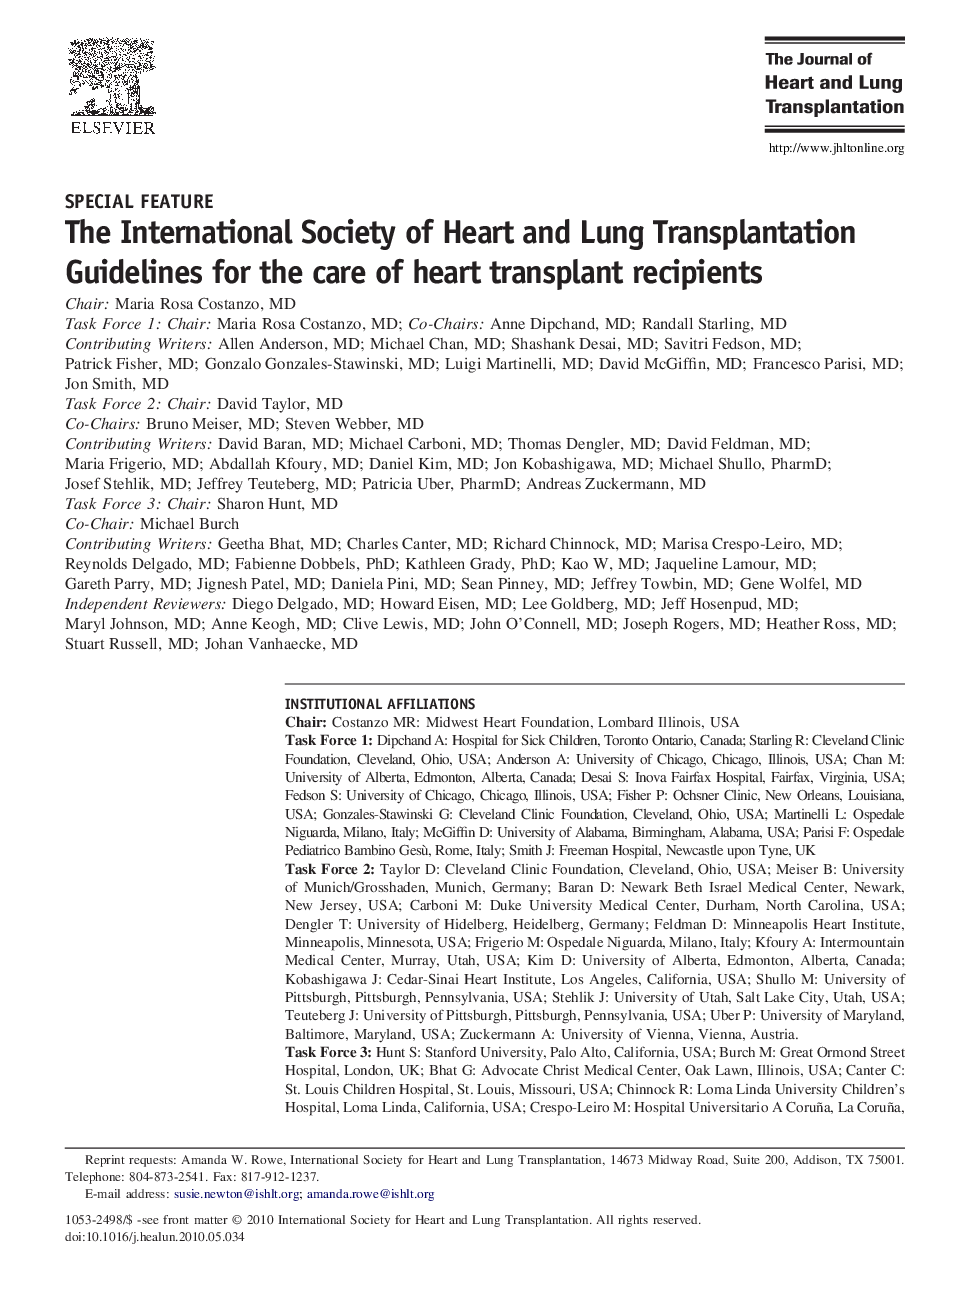 The International Society of Heart and Lung Transplantation Guidelines for the care of heart transplant recipients